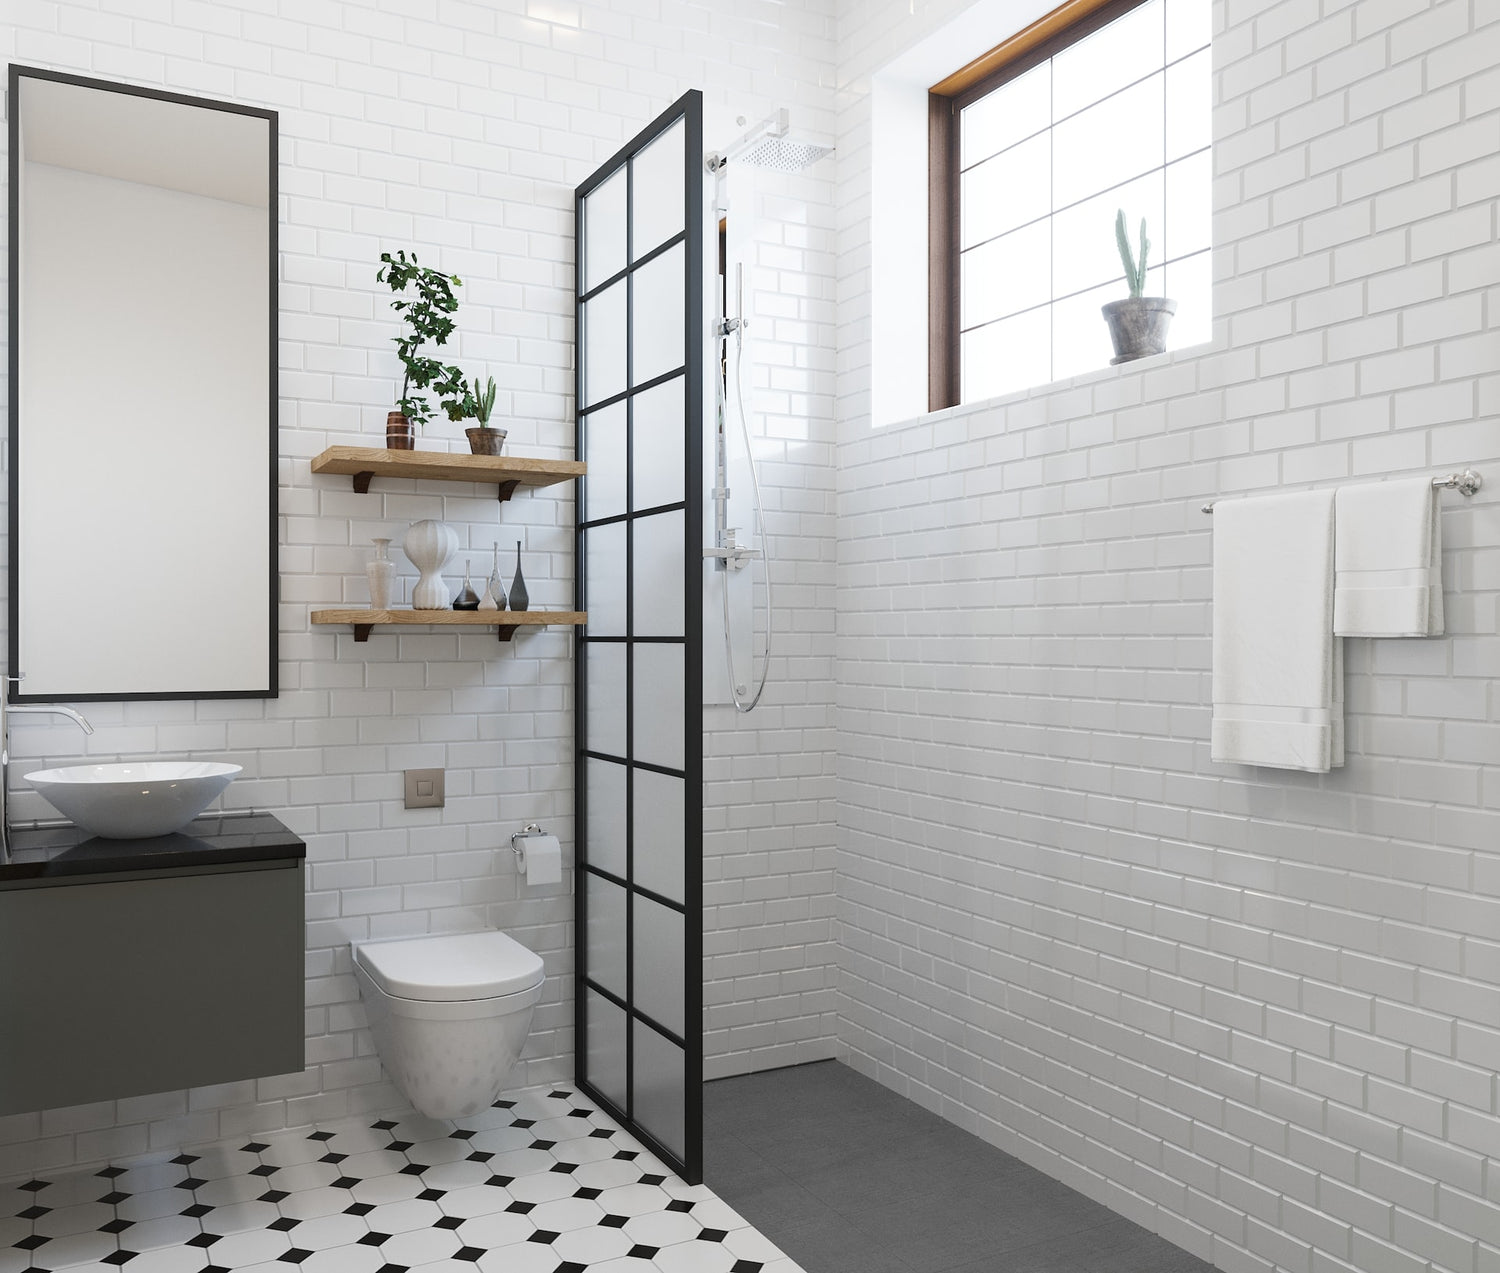 How to Choose the Best Shower Doors for You